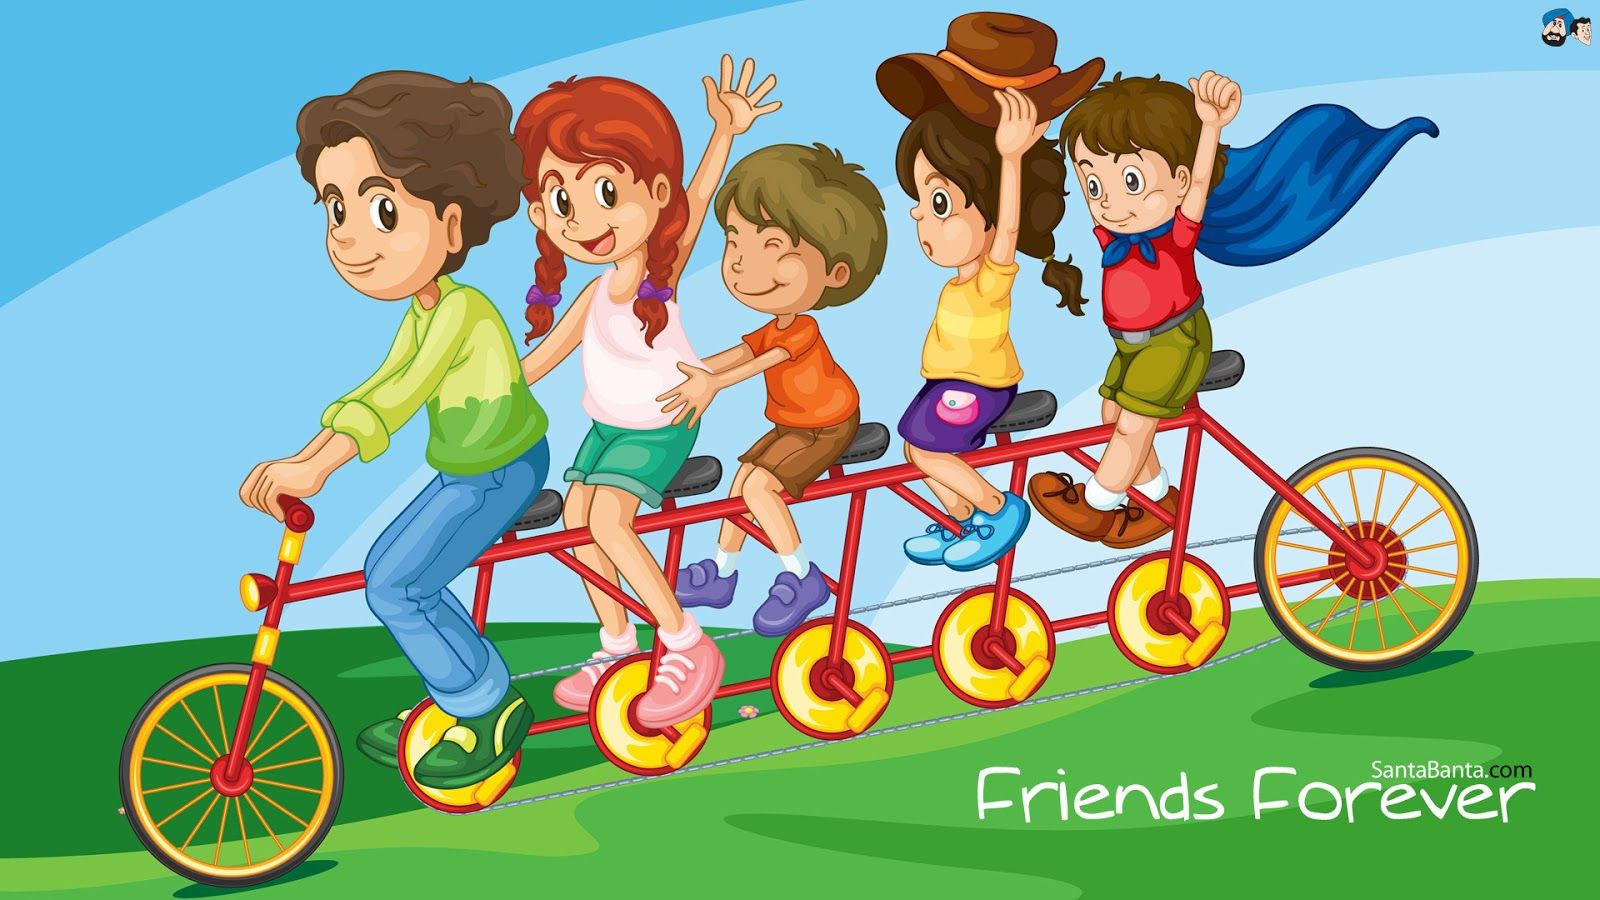 Happy Friendship Day hd Images, Wallpapers 